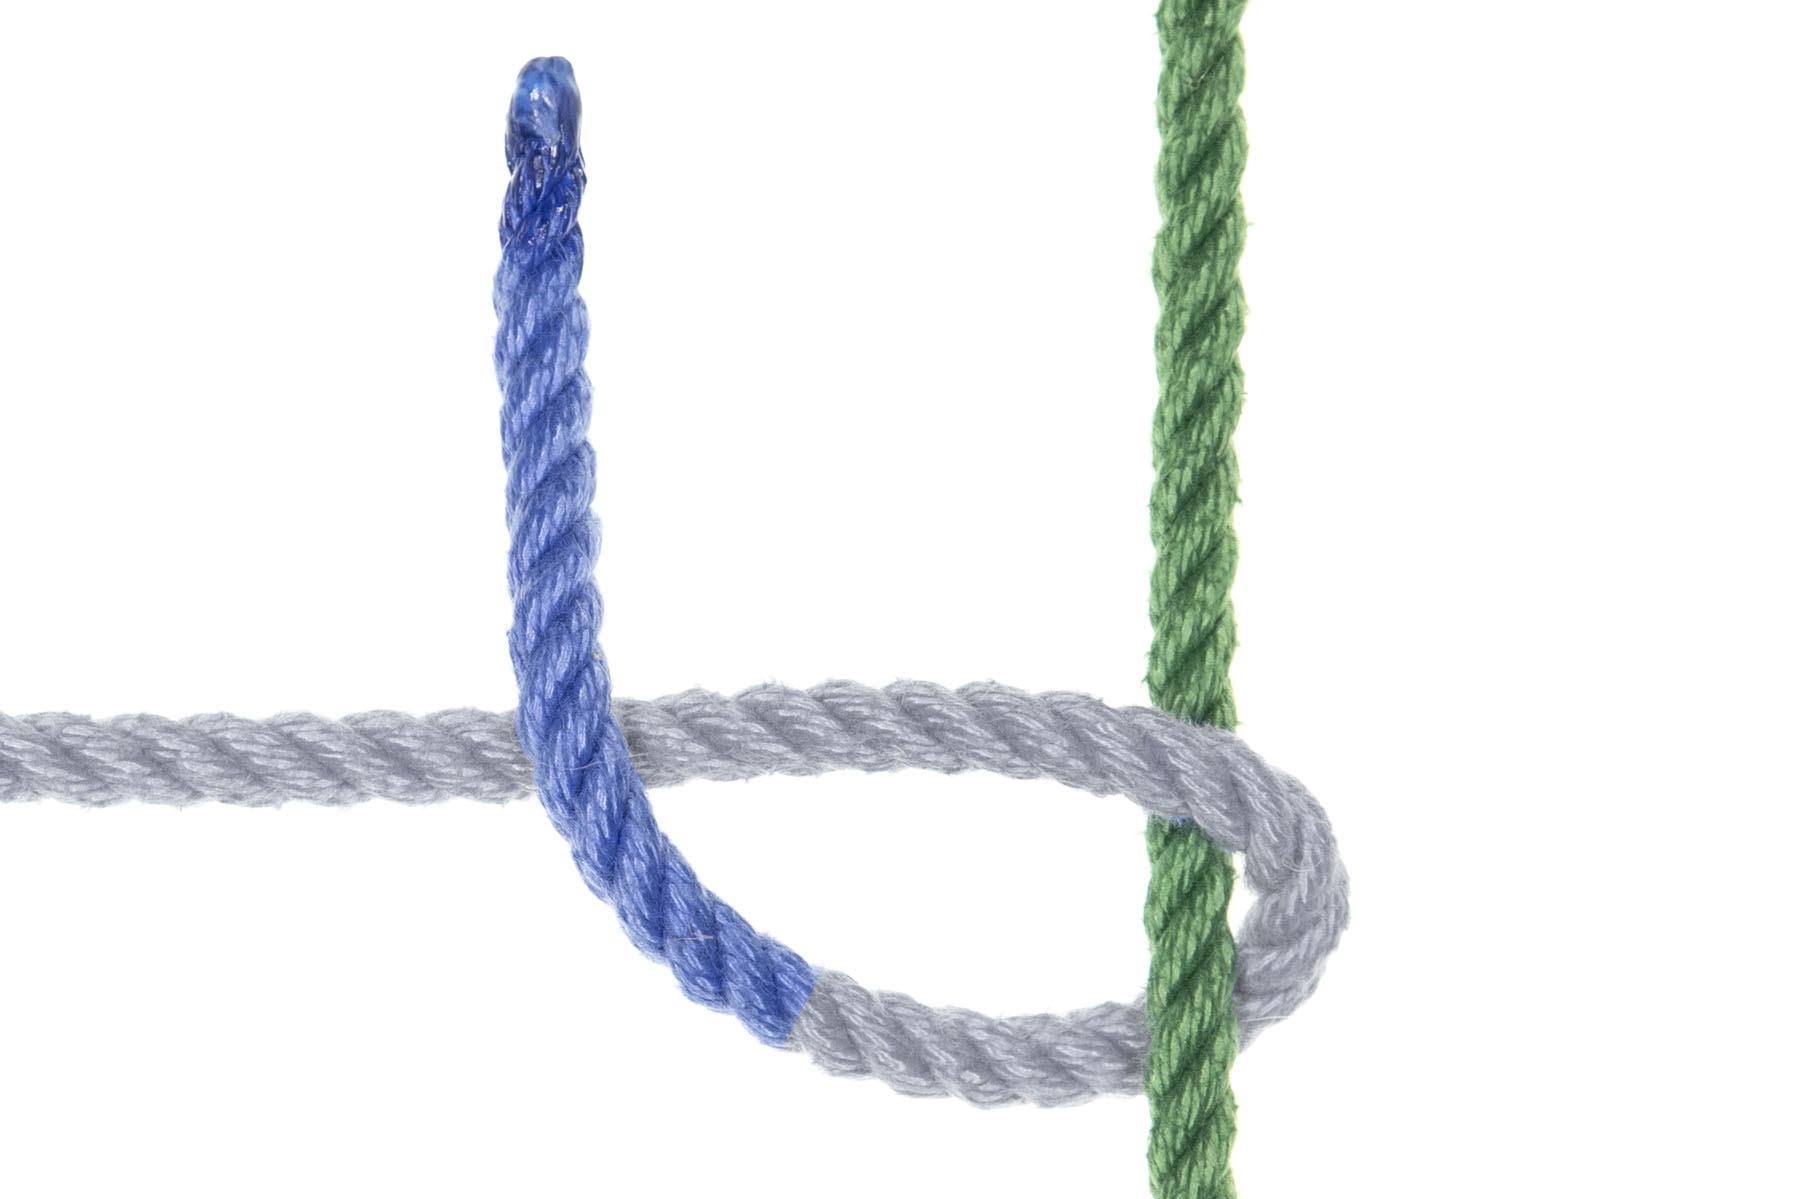 The blue rope crosses over itself, traveling upward.